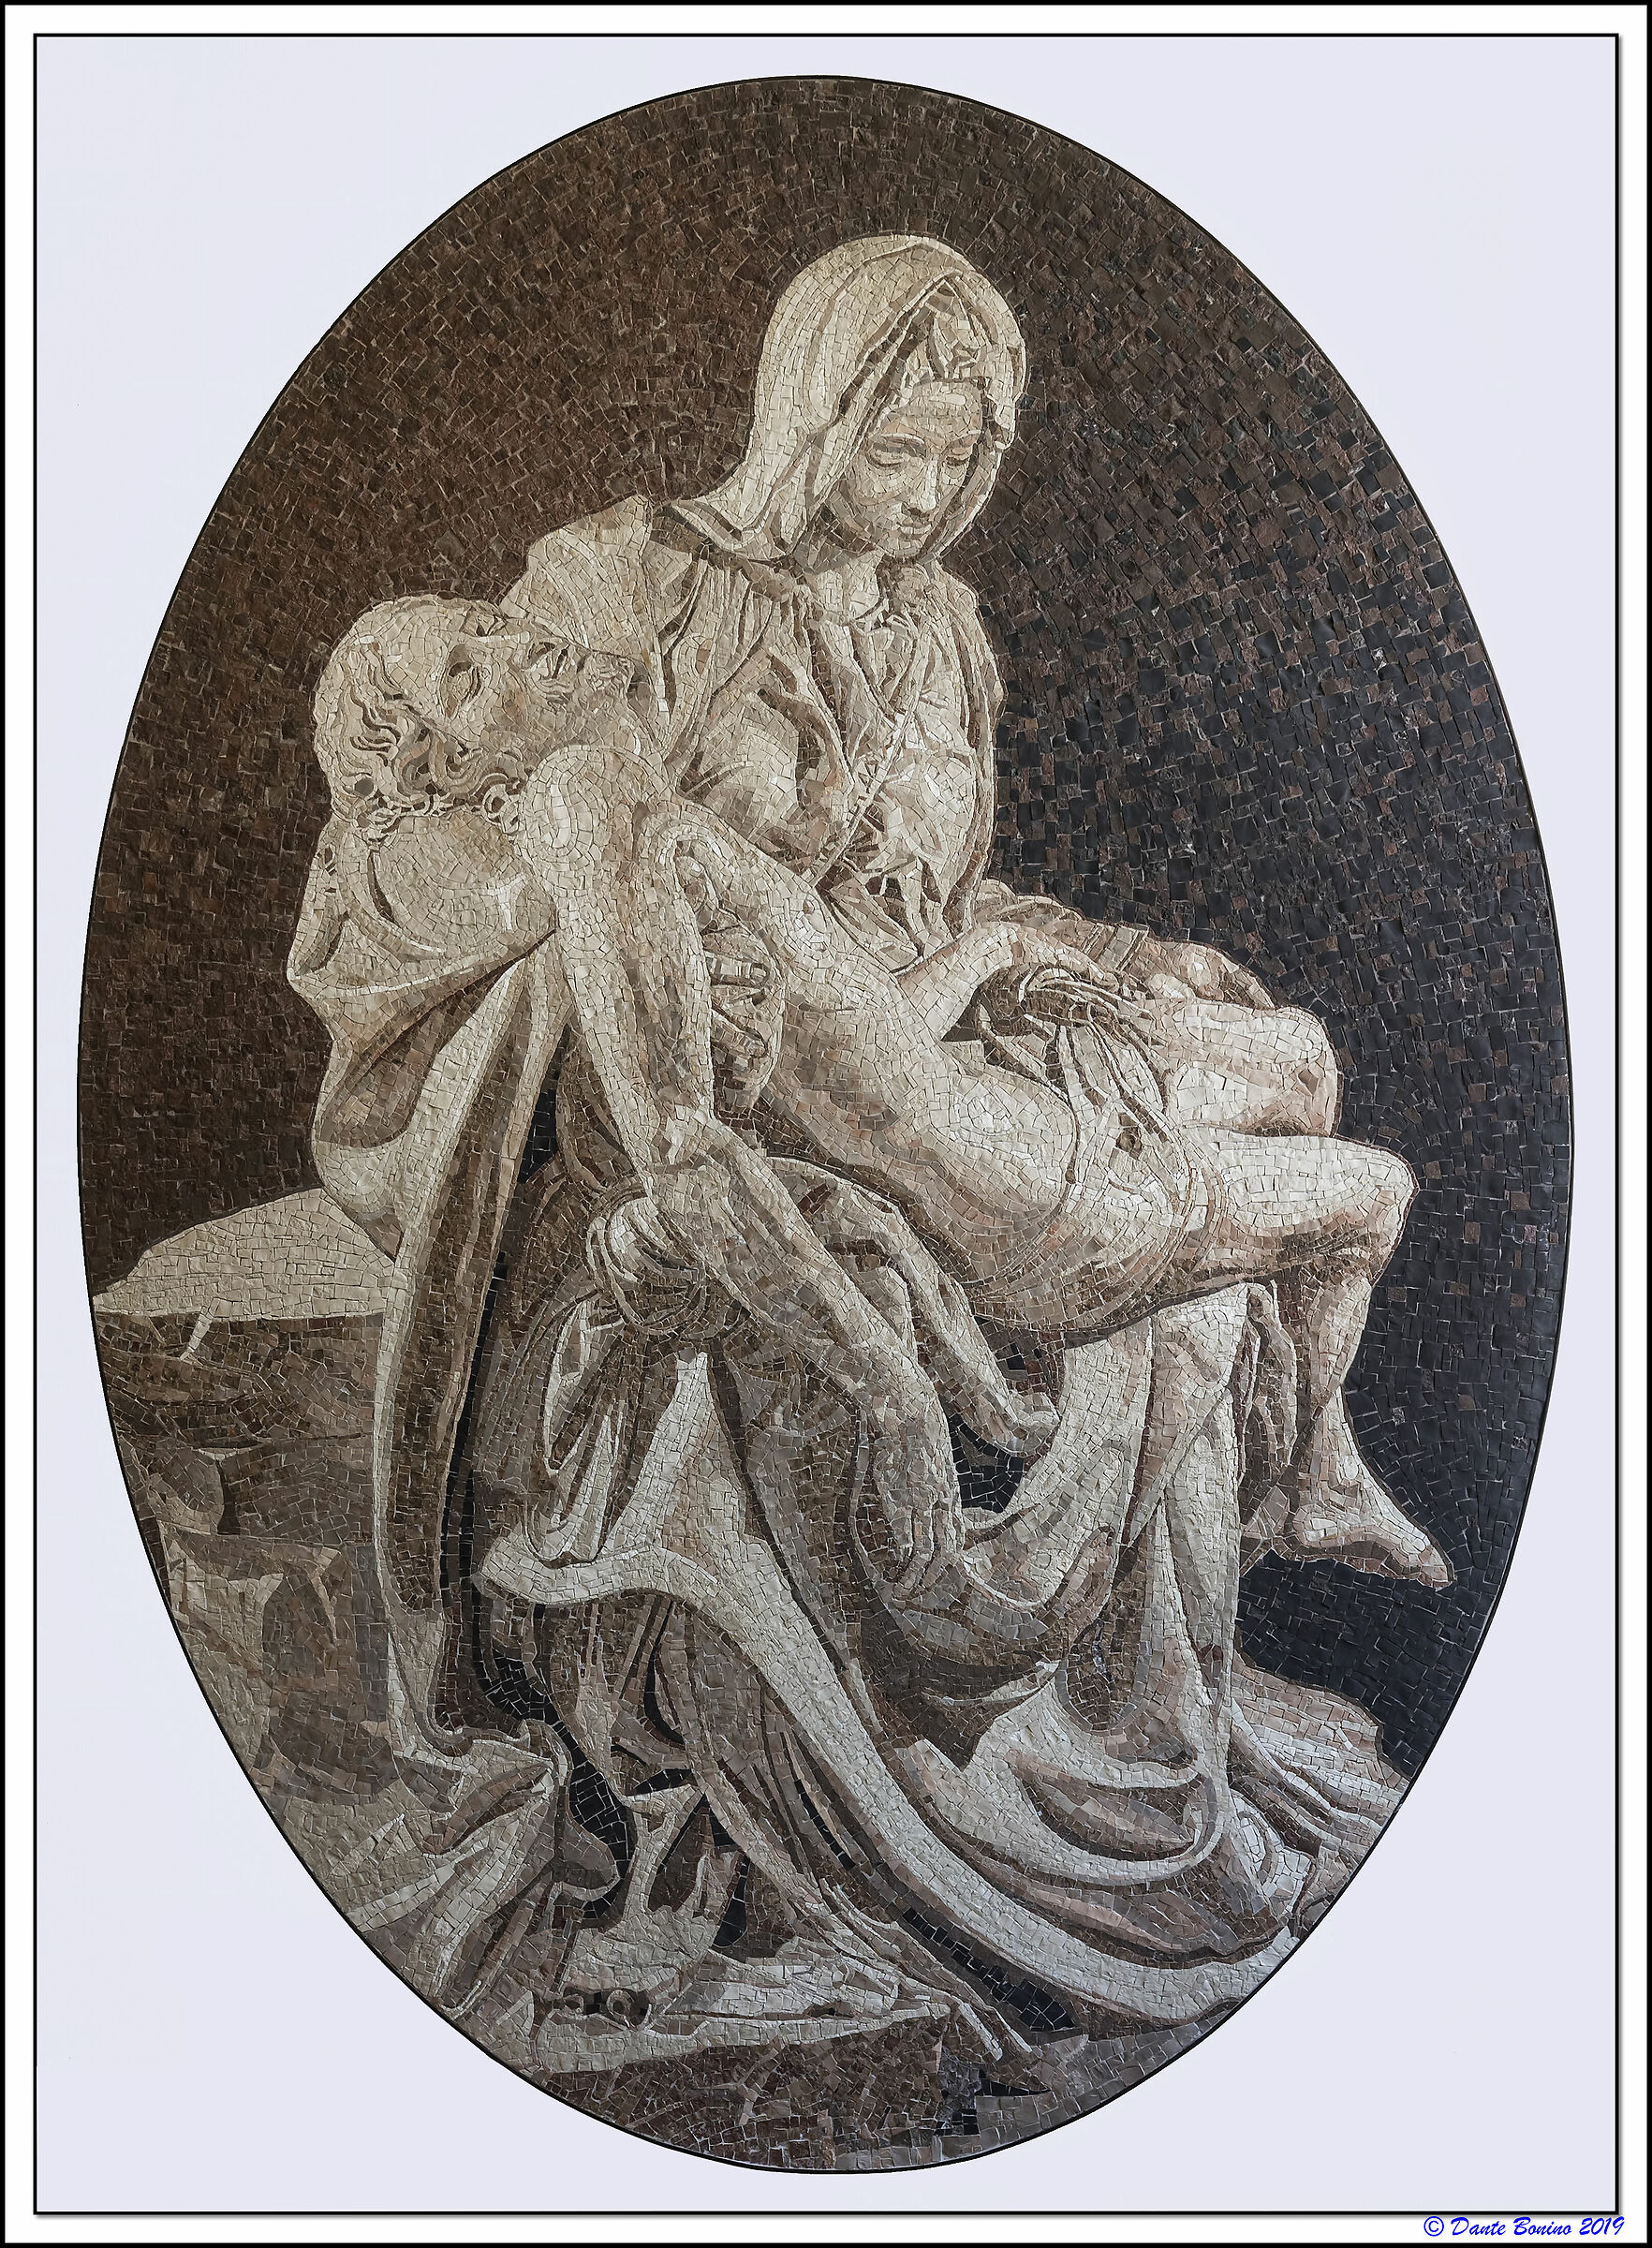 From the school of mosaicists in Spilimbergo: The Pieta...